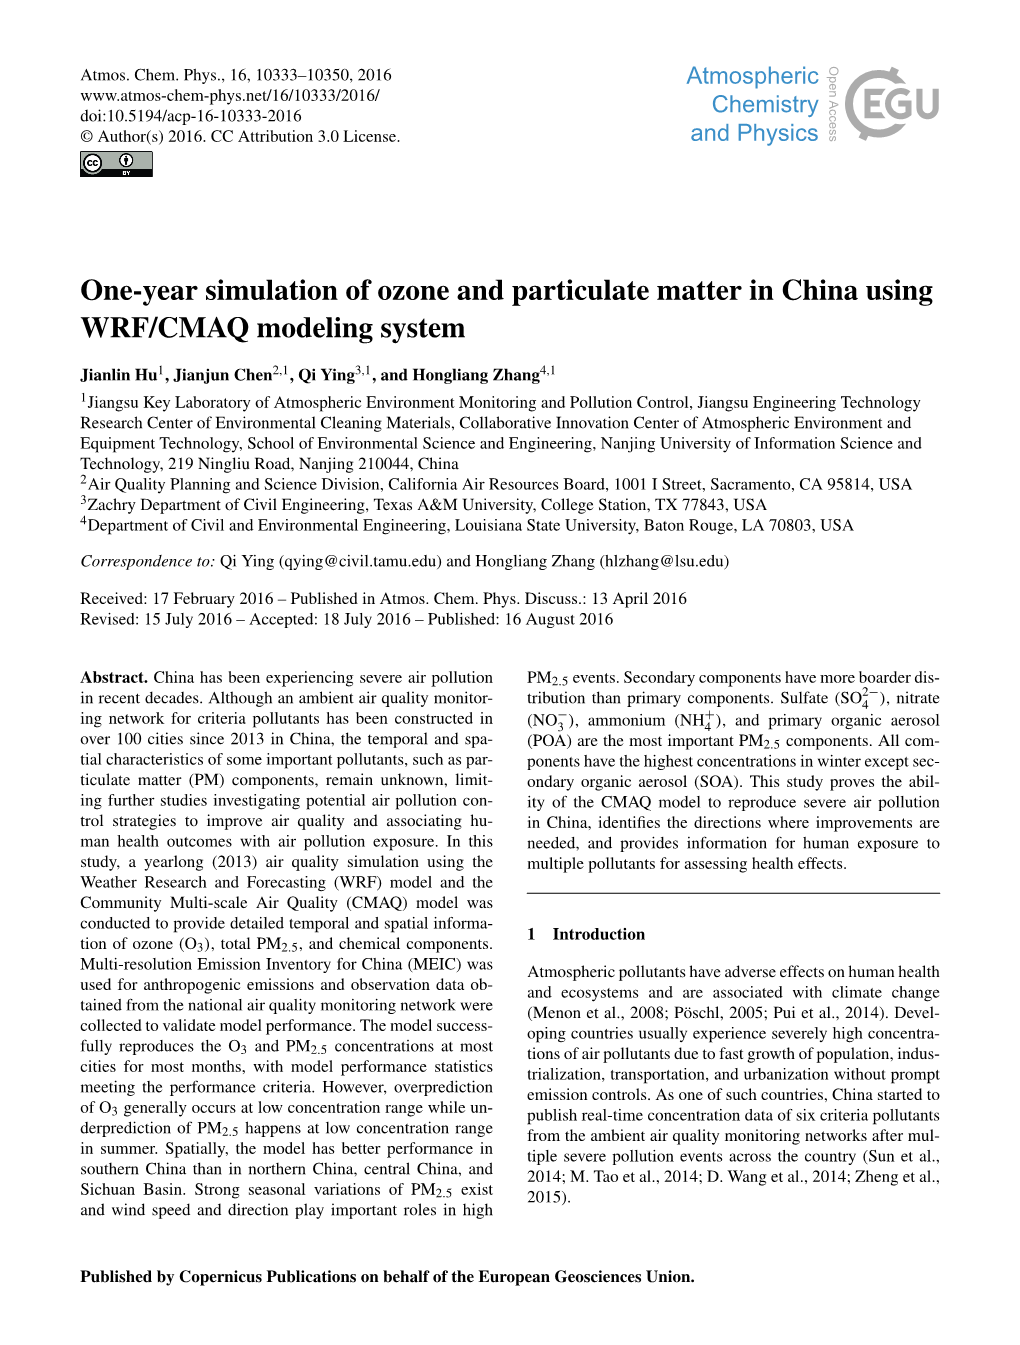 One-Year Simulation of Ozone and Particulate Matter in China Using WRF/CMAQ Modeling System